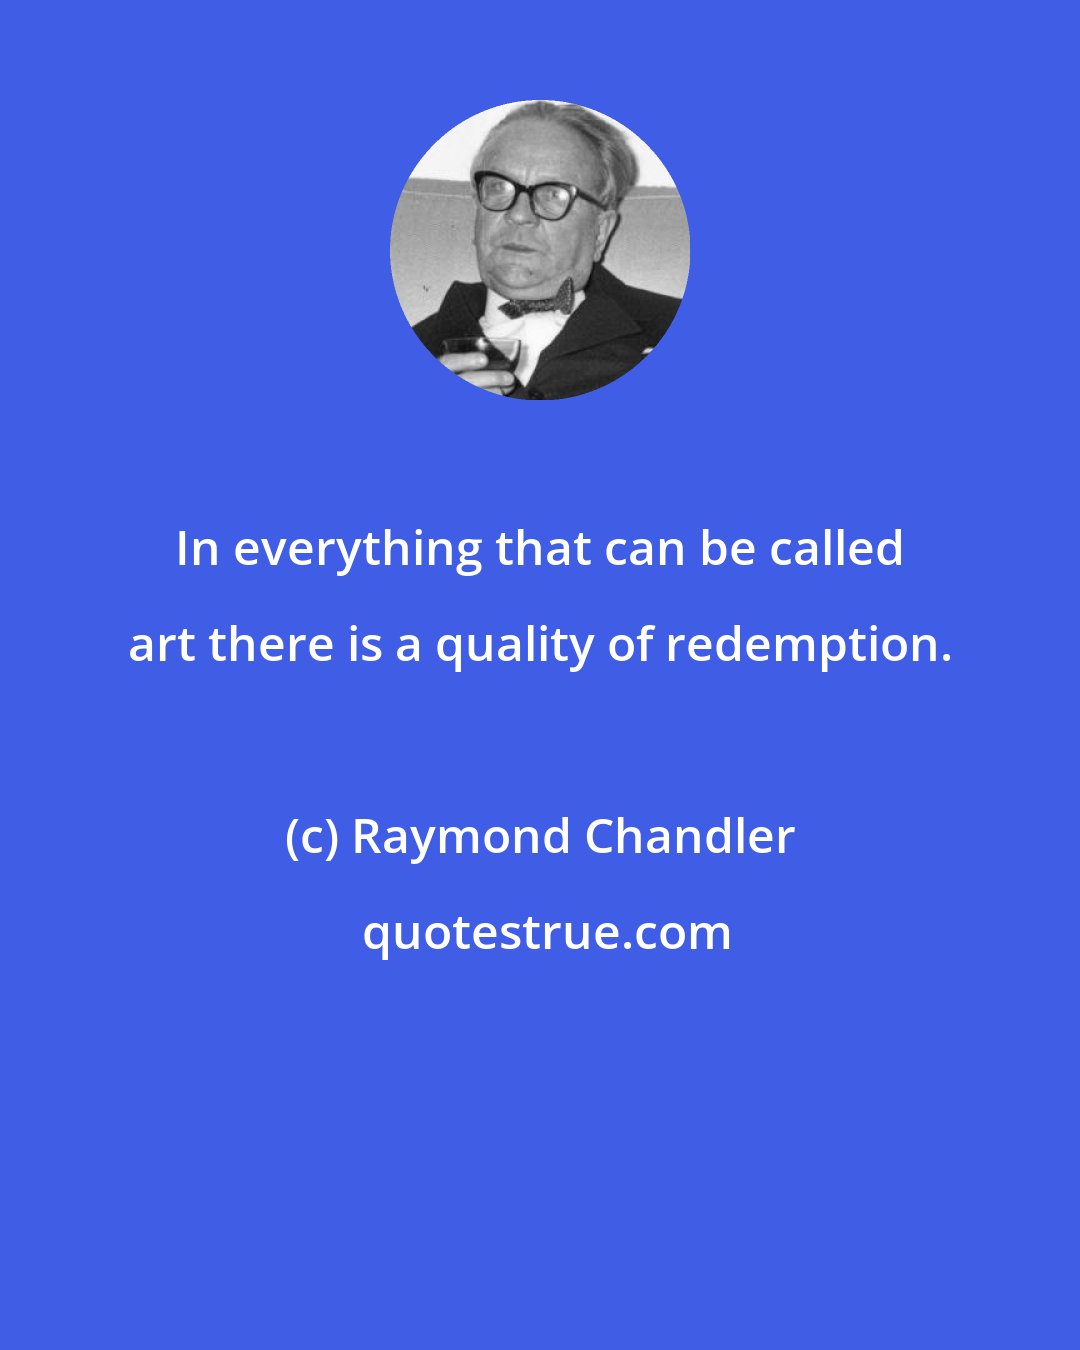 Raymond Chandler: In everything that can be called art there is a quality of redemption.